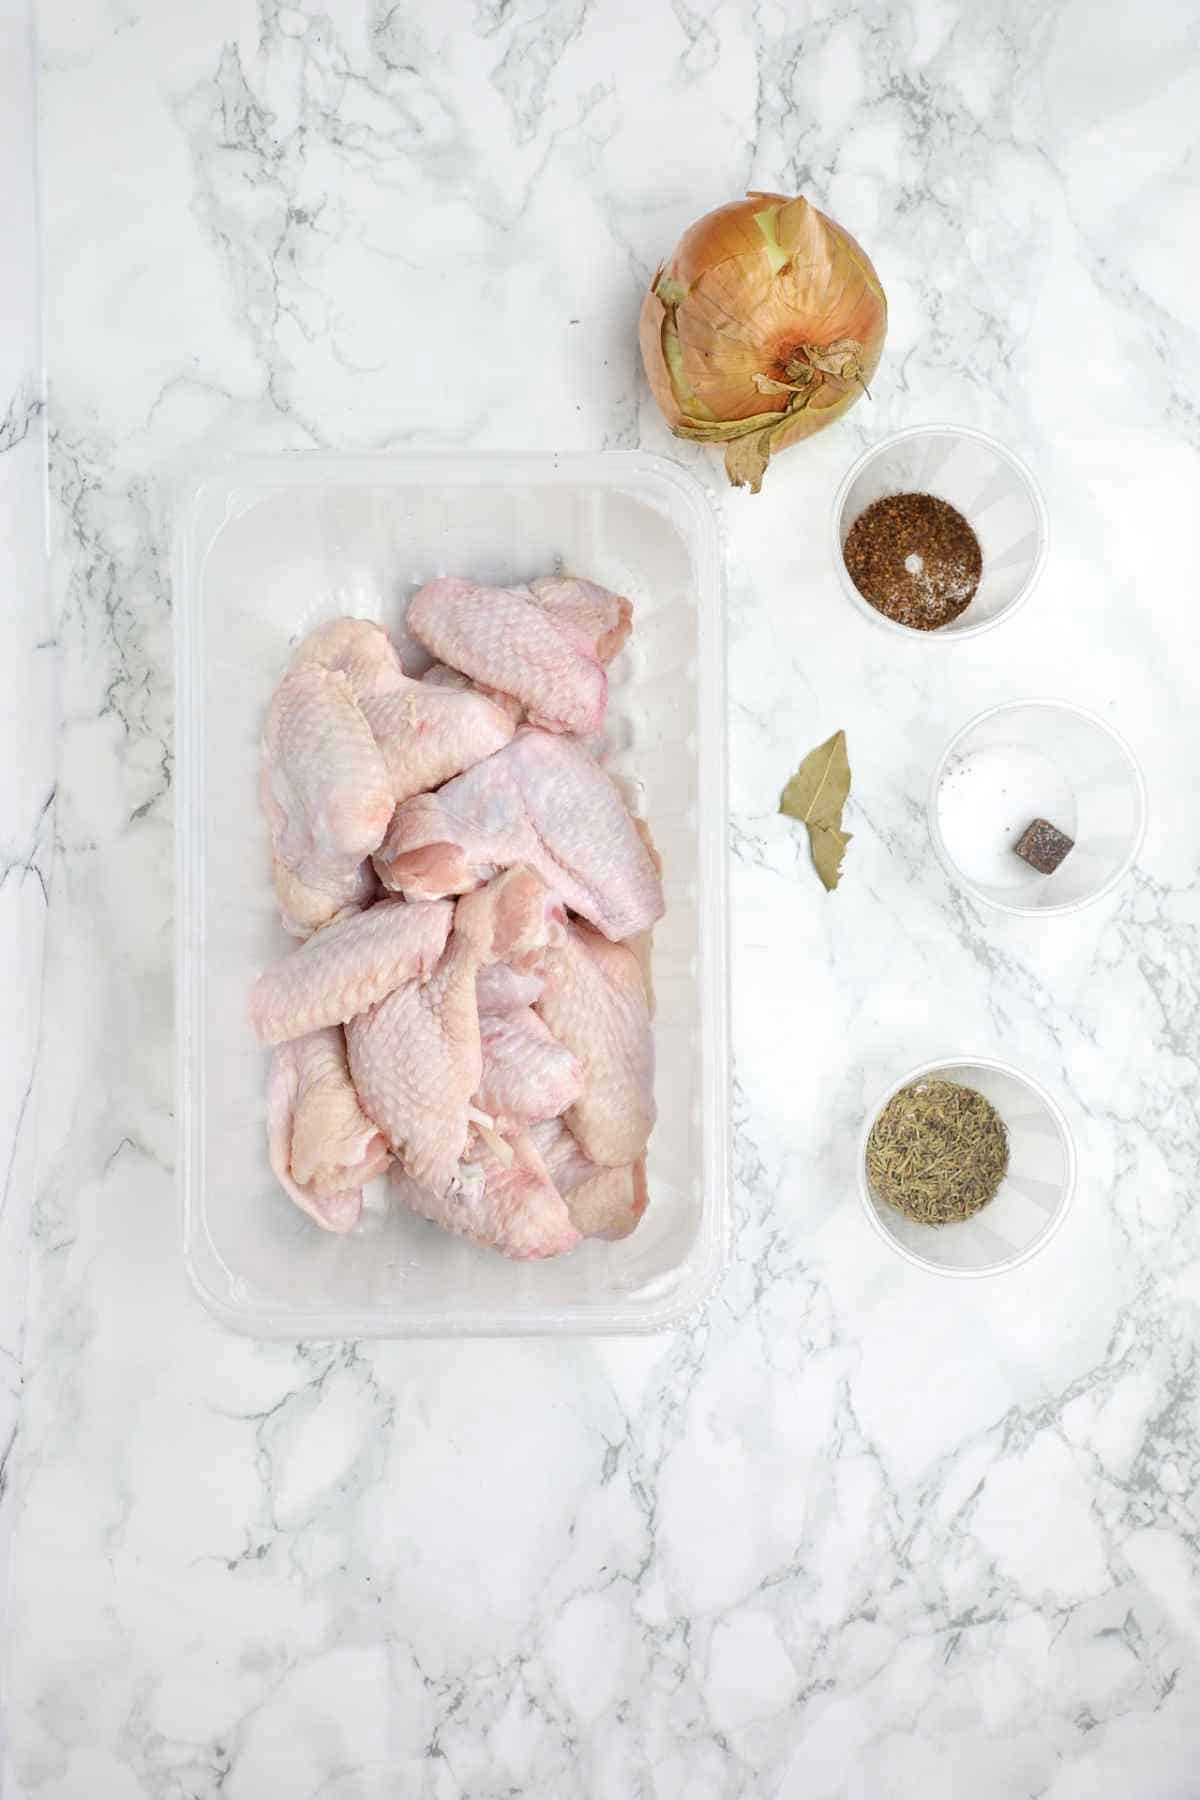 ingredients for boiled chicken wings displayed.